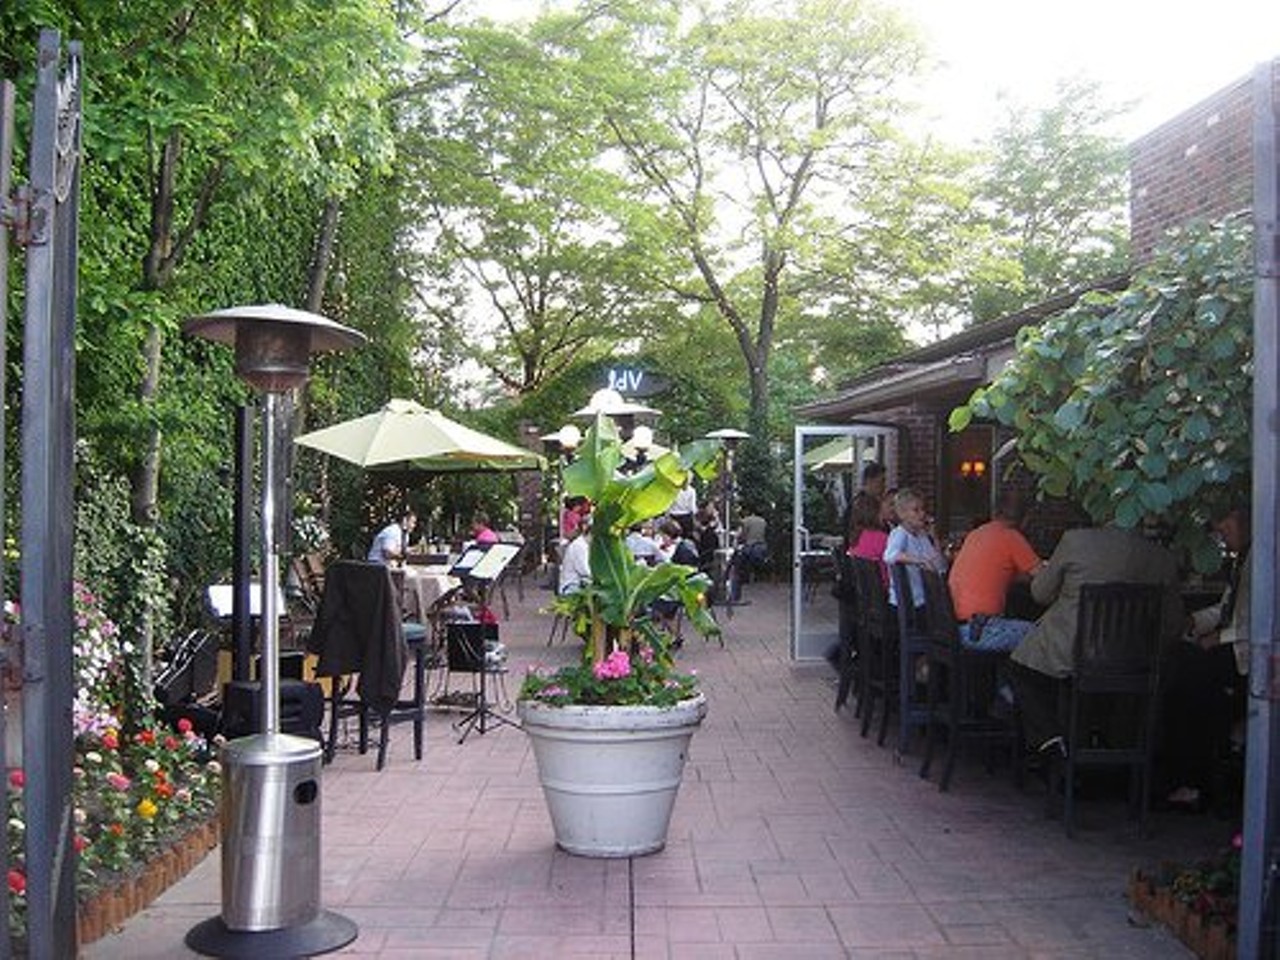 La Dolce Vita 17546 Woodward, Detroit; 313-865-0331
If you&#146;re looking for the perfect date-night patio, look no further. Nothing says romance quite like Italian food served in a cozy outdoor courtyard. La Dolce Vita embodies that romantic atmosphere, serving classic Italian cuisine in an intimate Palmer Park setting. 
(Photo credit: La Dolce Vita on Yelp)